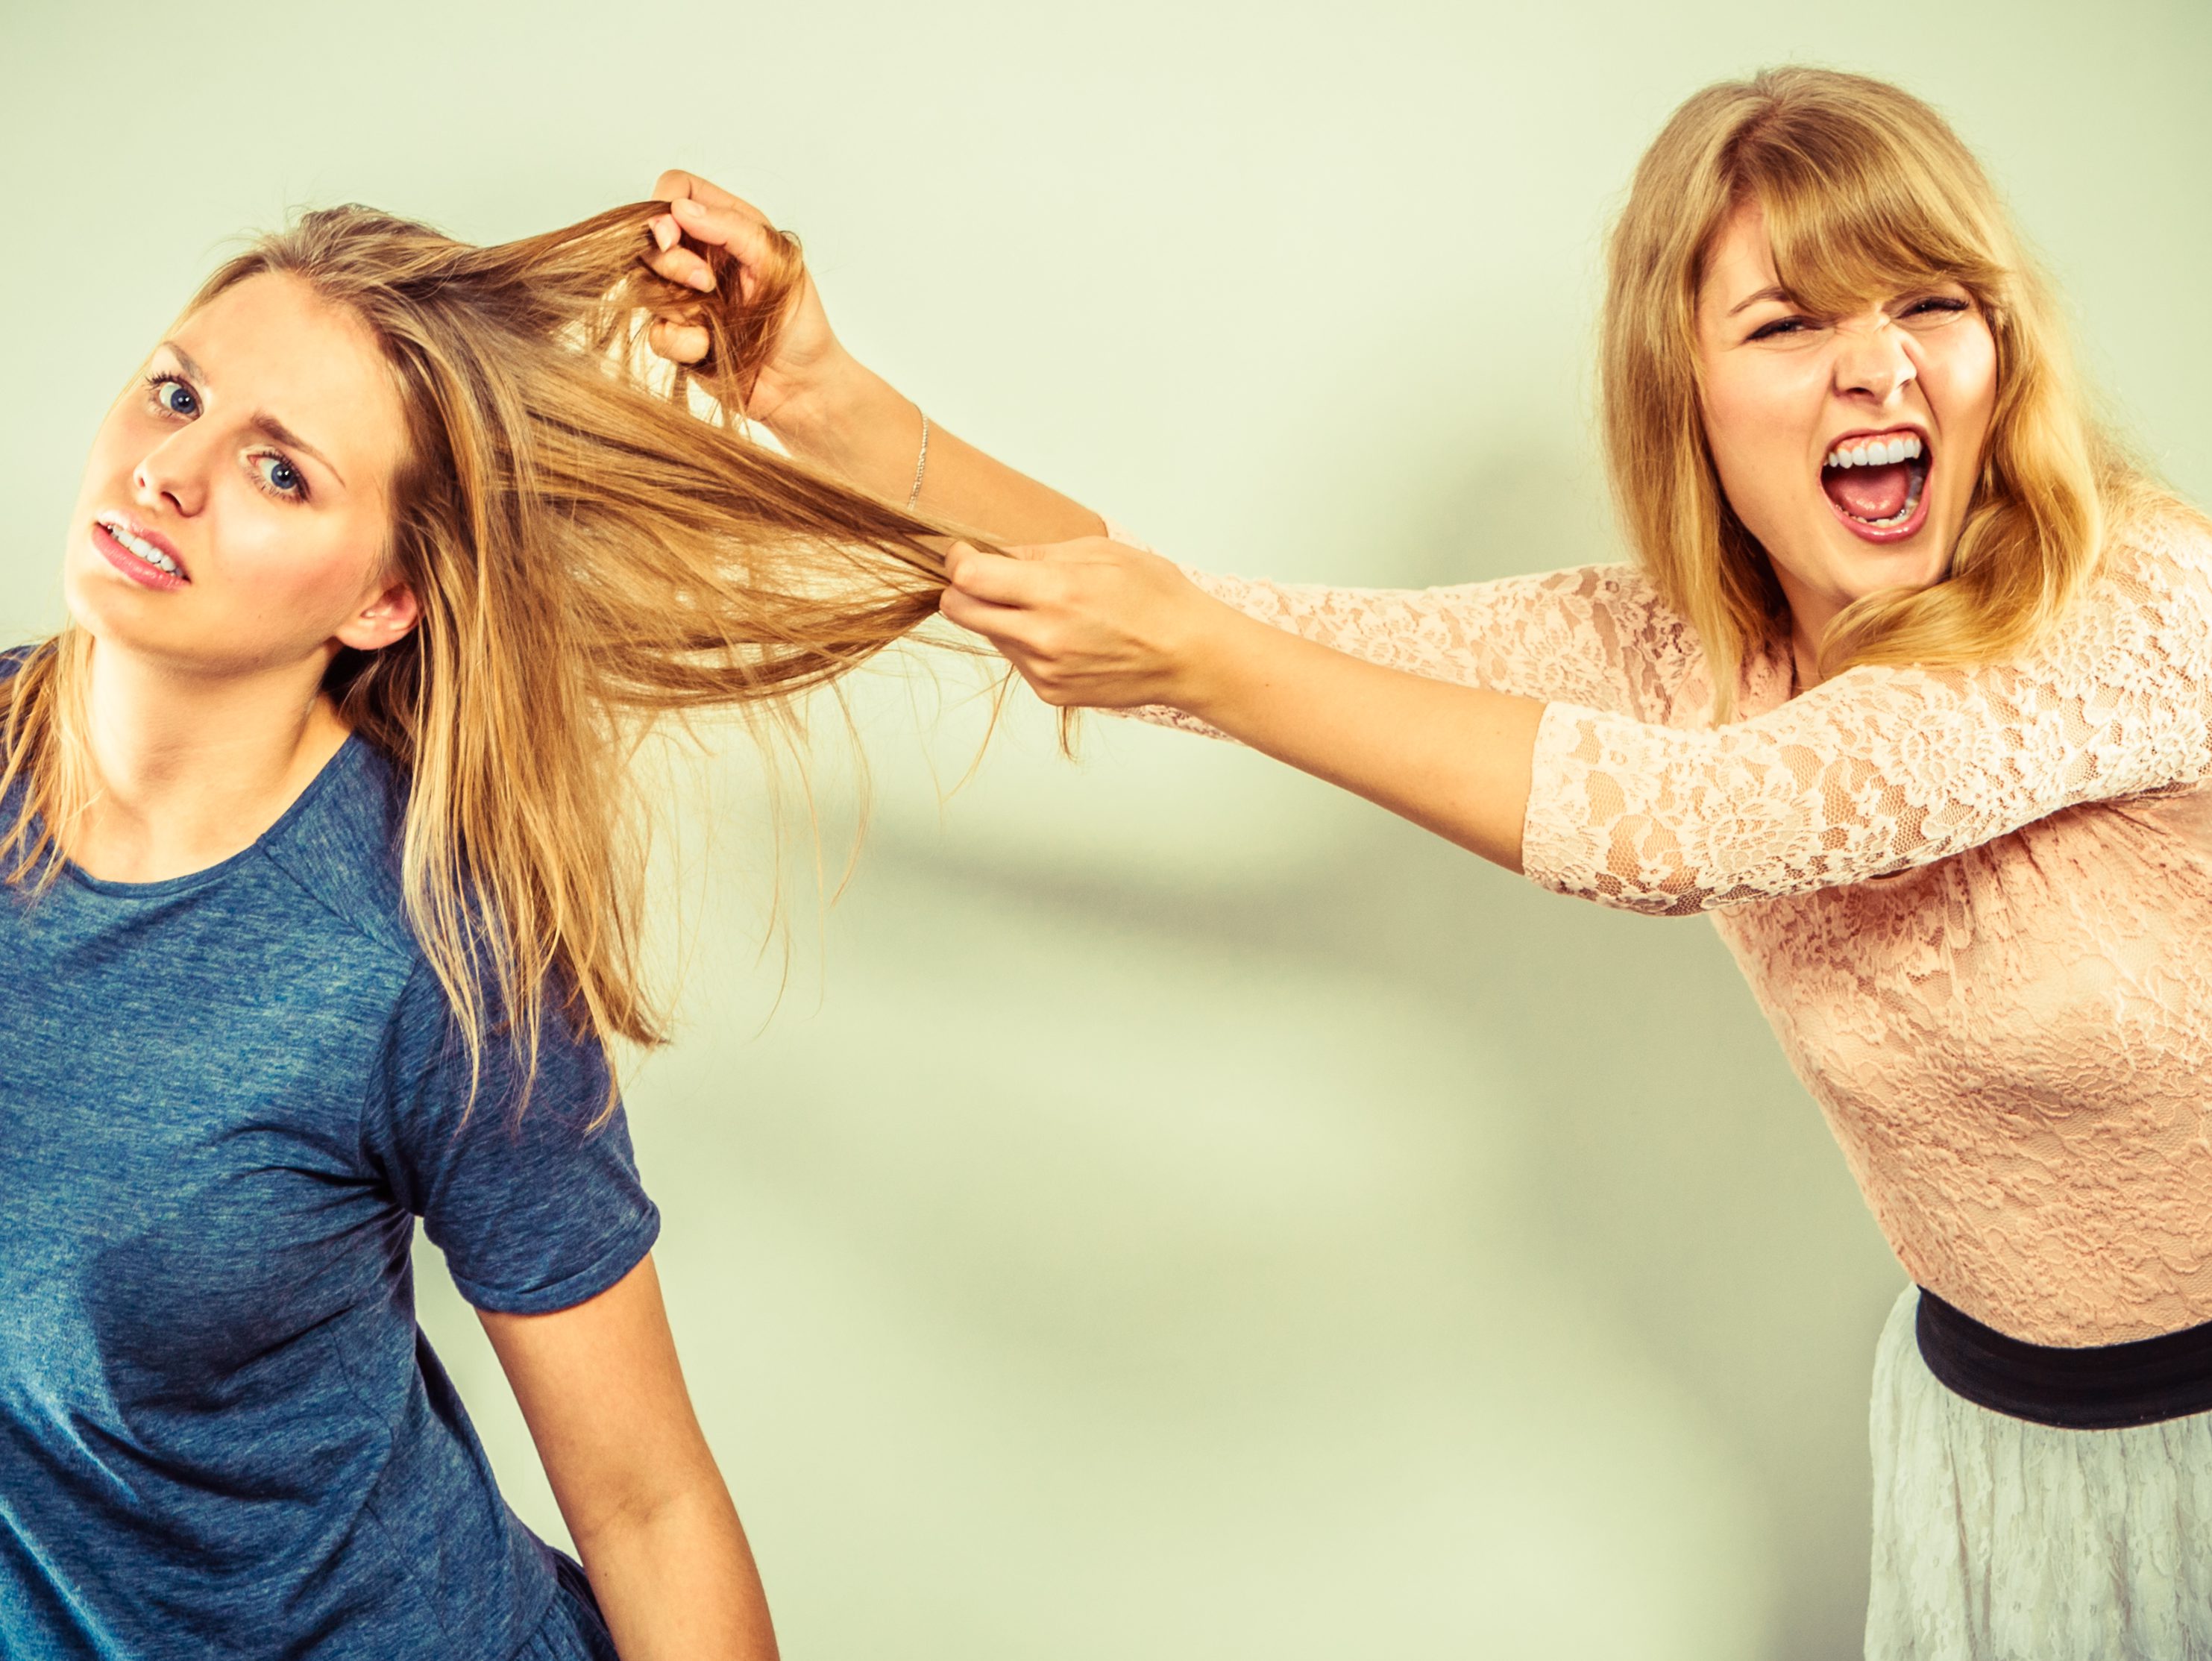 7 things your colleagues do that make you crazy